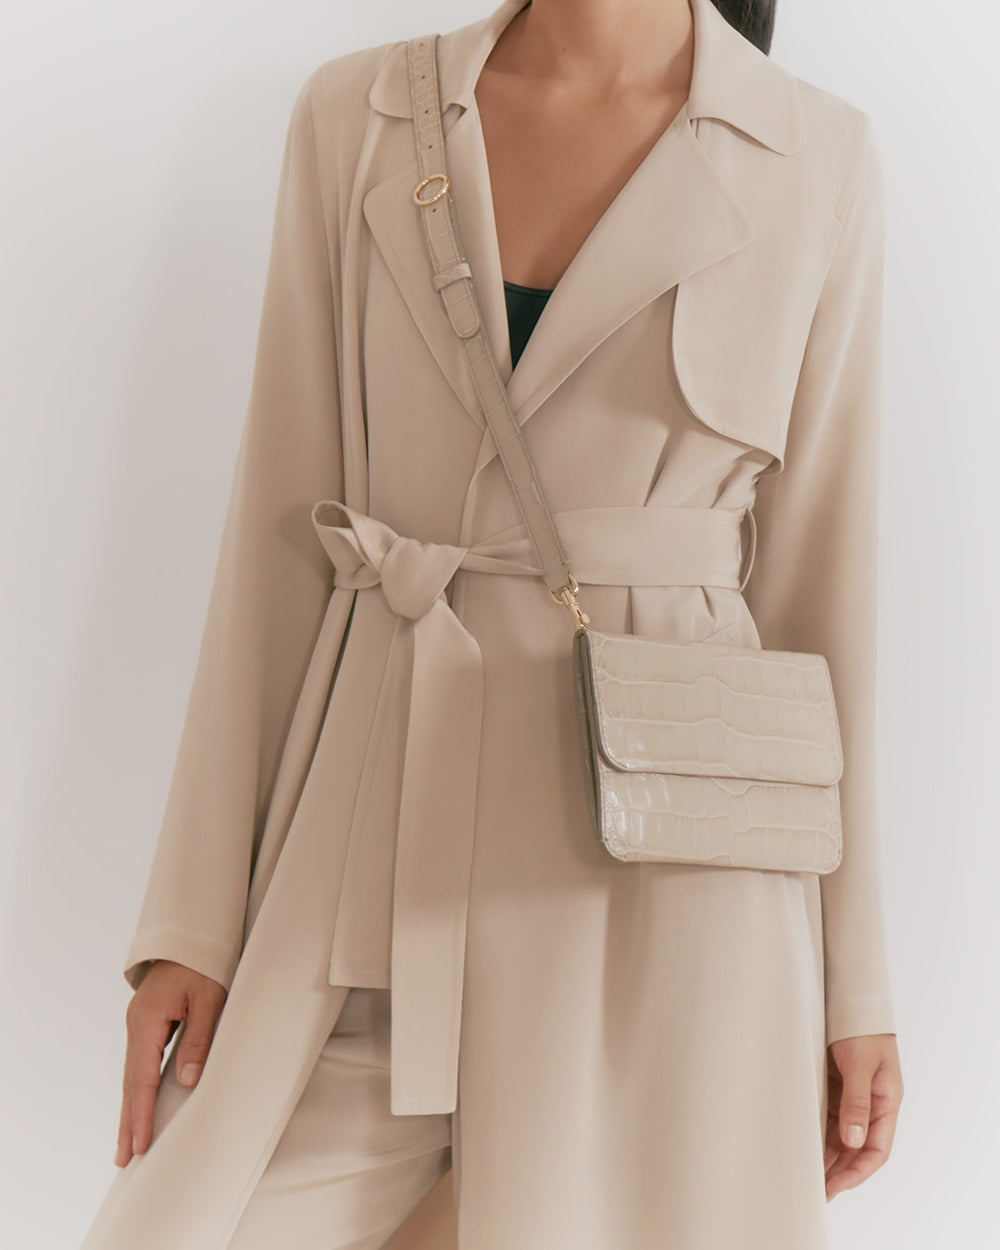 Woman wearing a trench coat with a crossbody bag